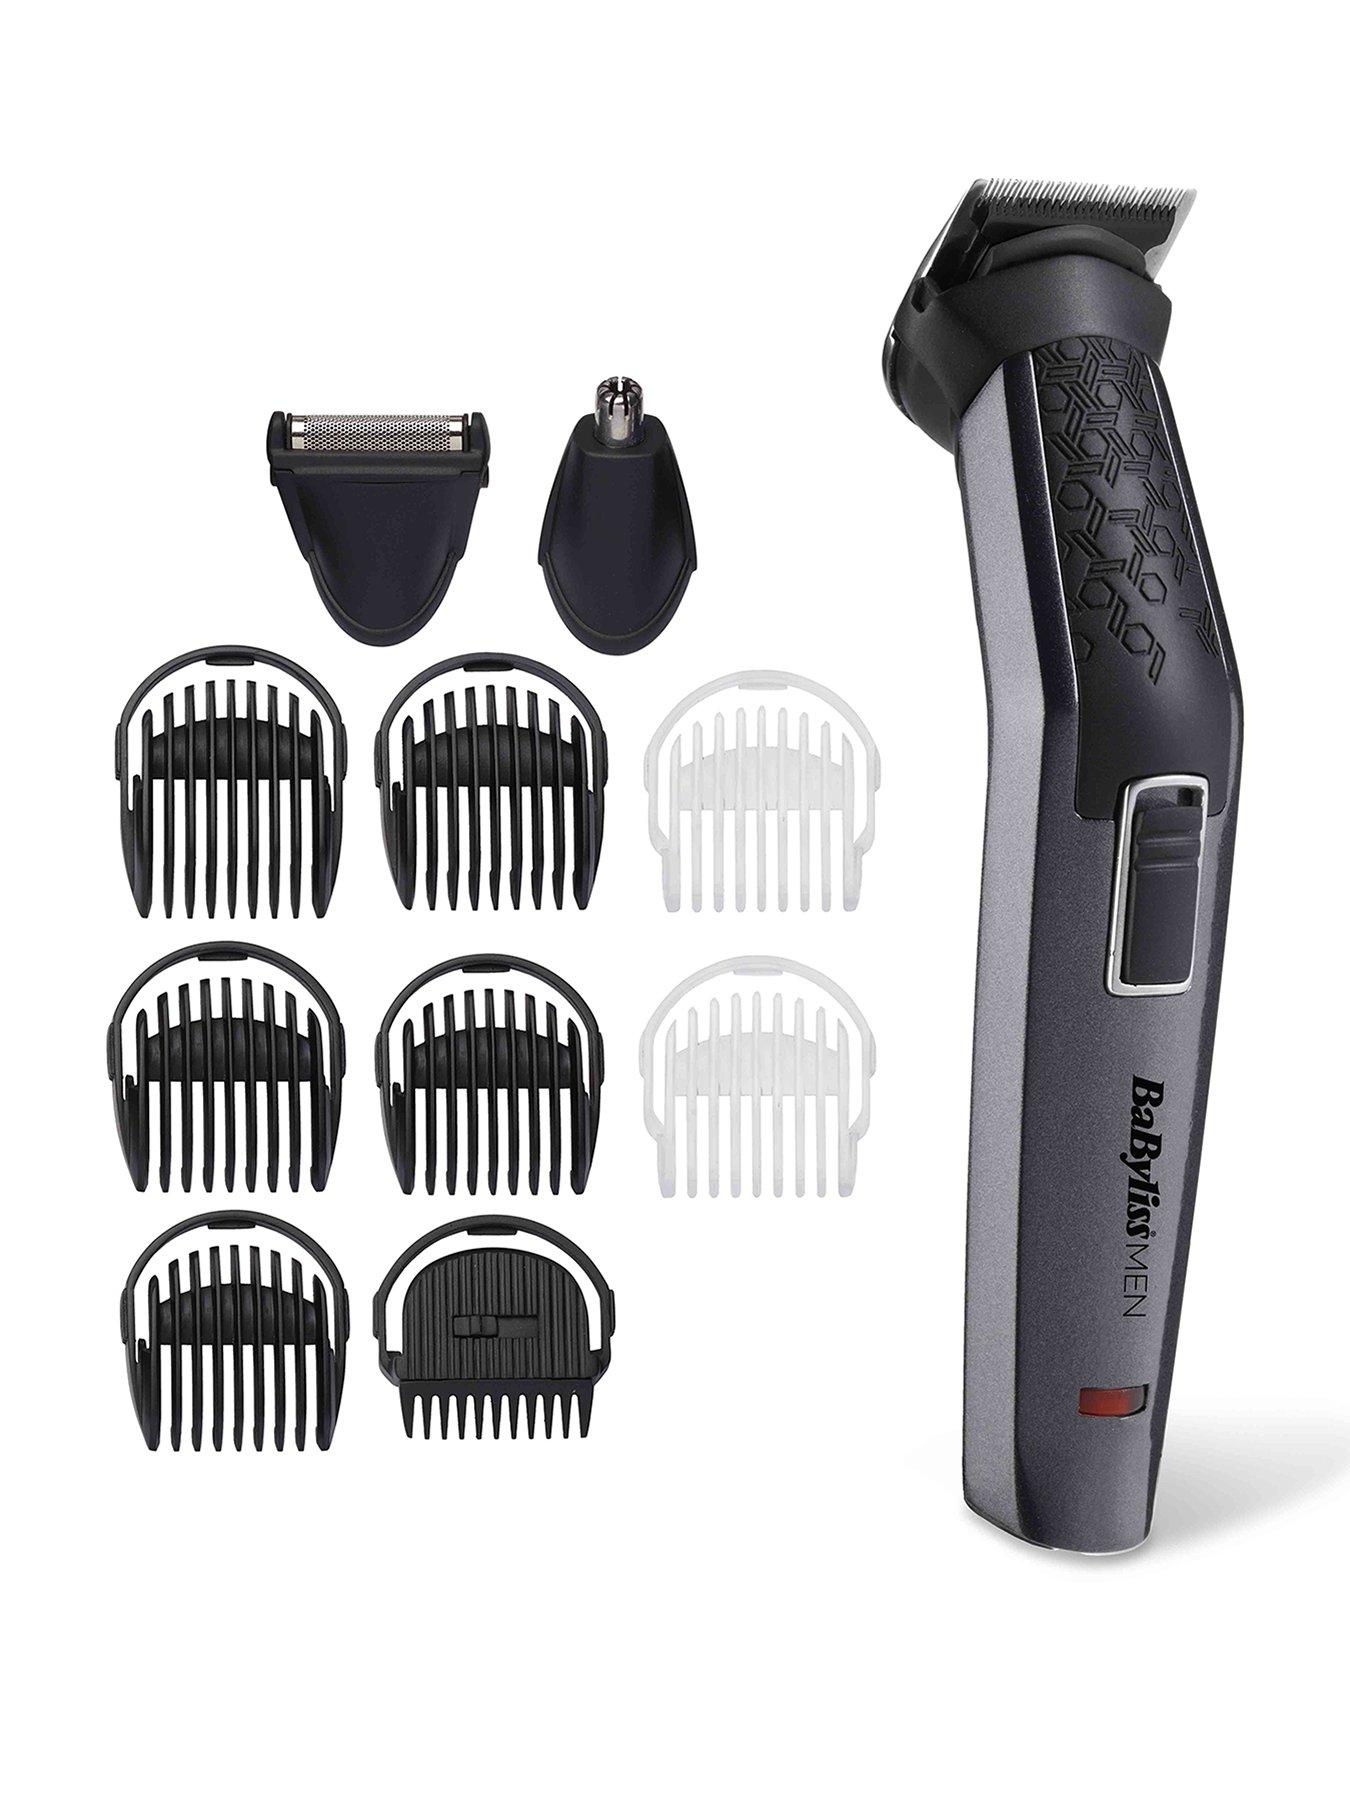 hair clippers ireland online